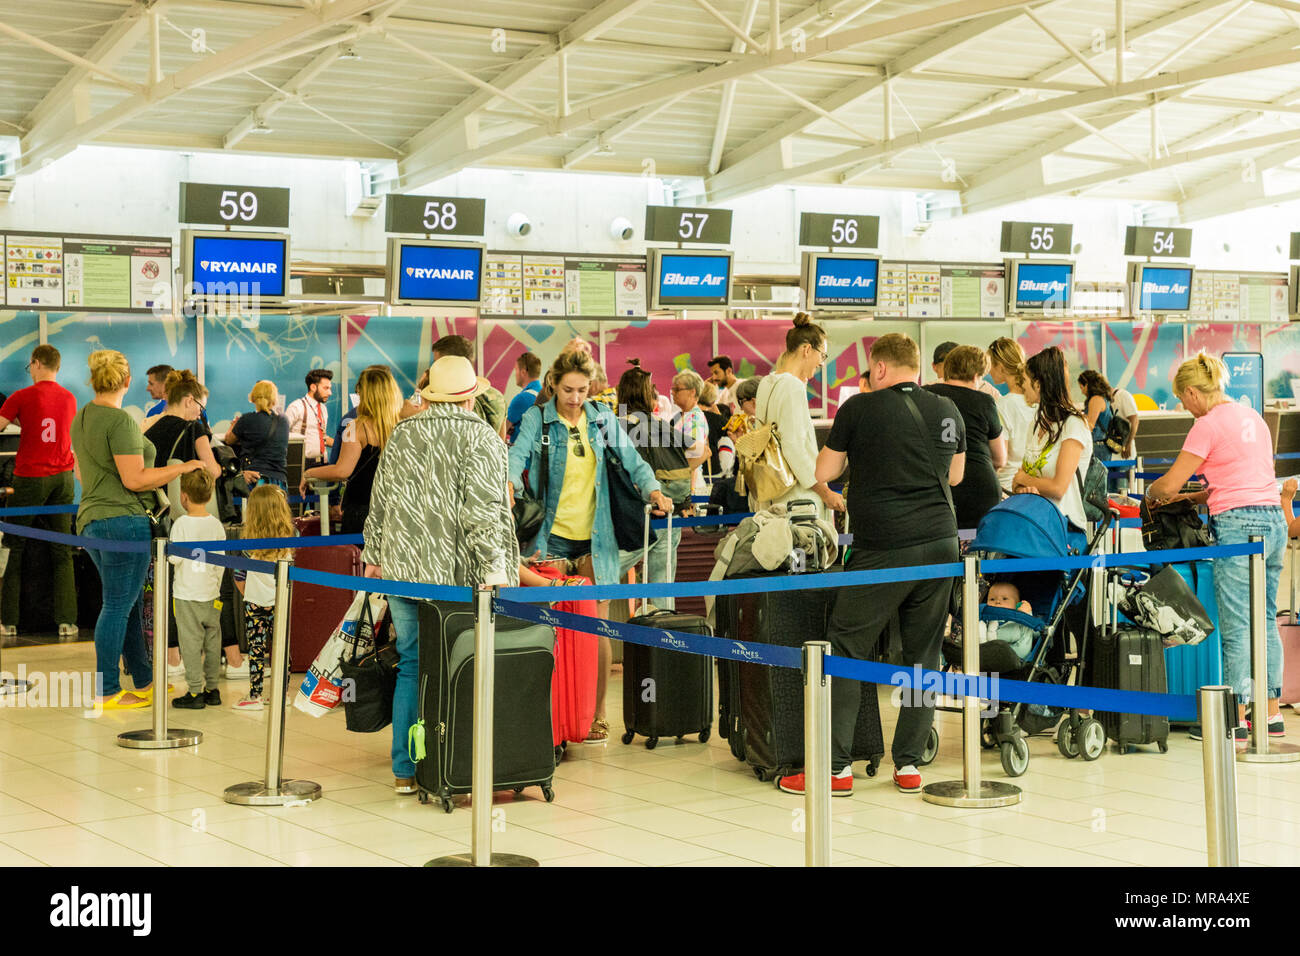 Larnaca, Cyprus. May 2018. A view of the ryanair check in desk inside of the departures terminal  at Larnaca airport, Cyprus, Stock Photo